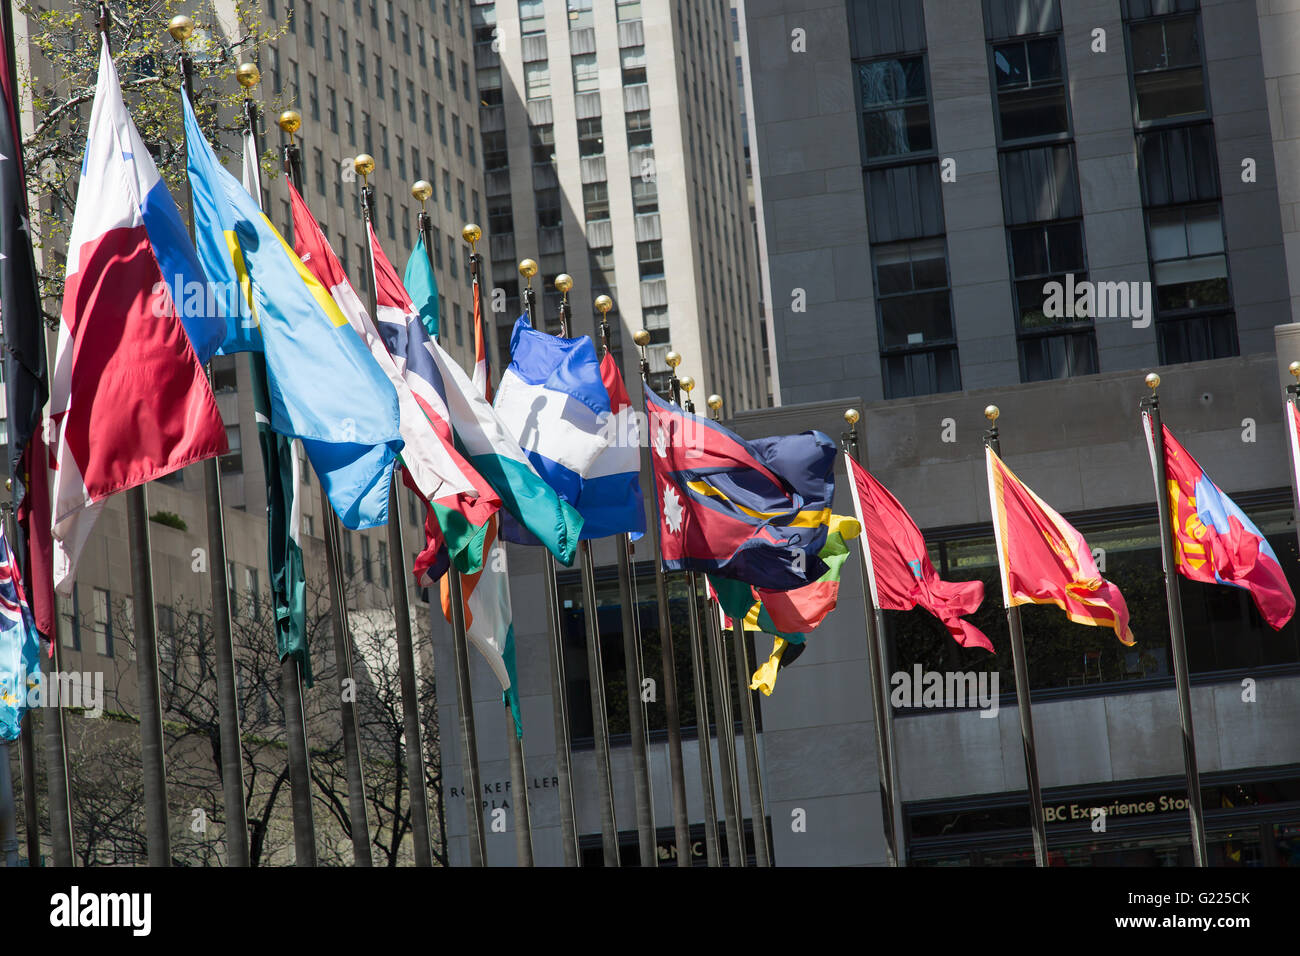 NEW YORK, USA - APRIL 21, 2016: Flagpoles display flags of United Nations member countries around the Rockefeller plaza. There a Stock Photo